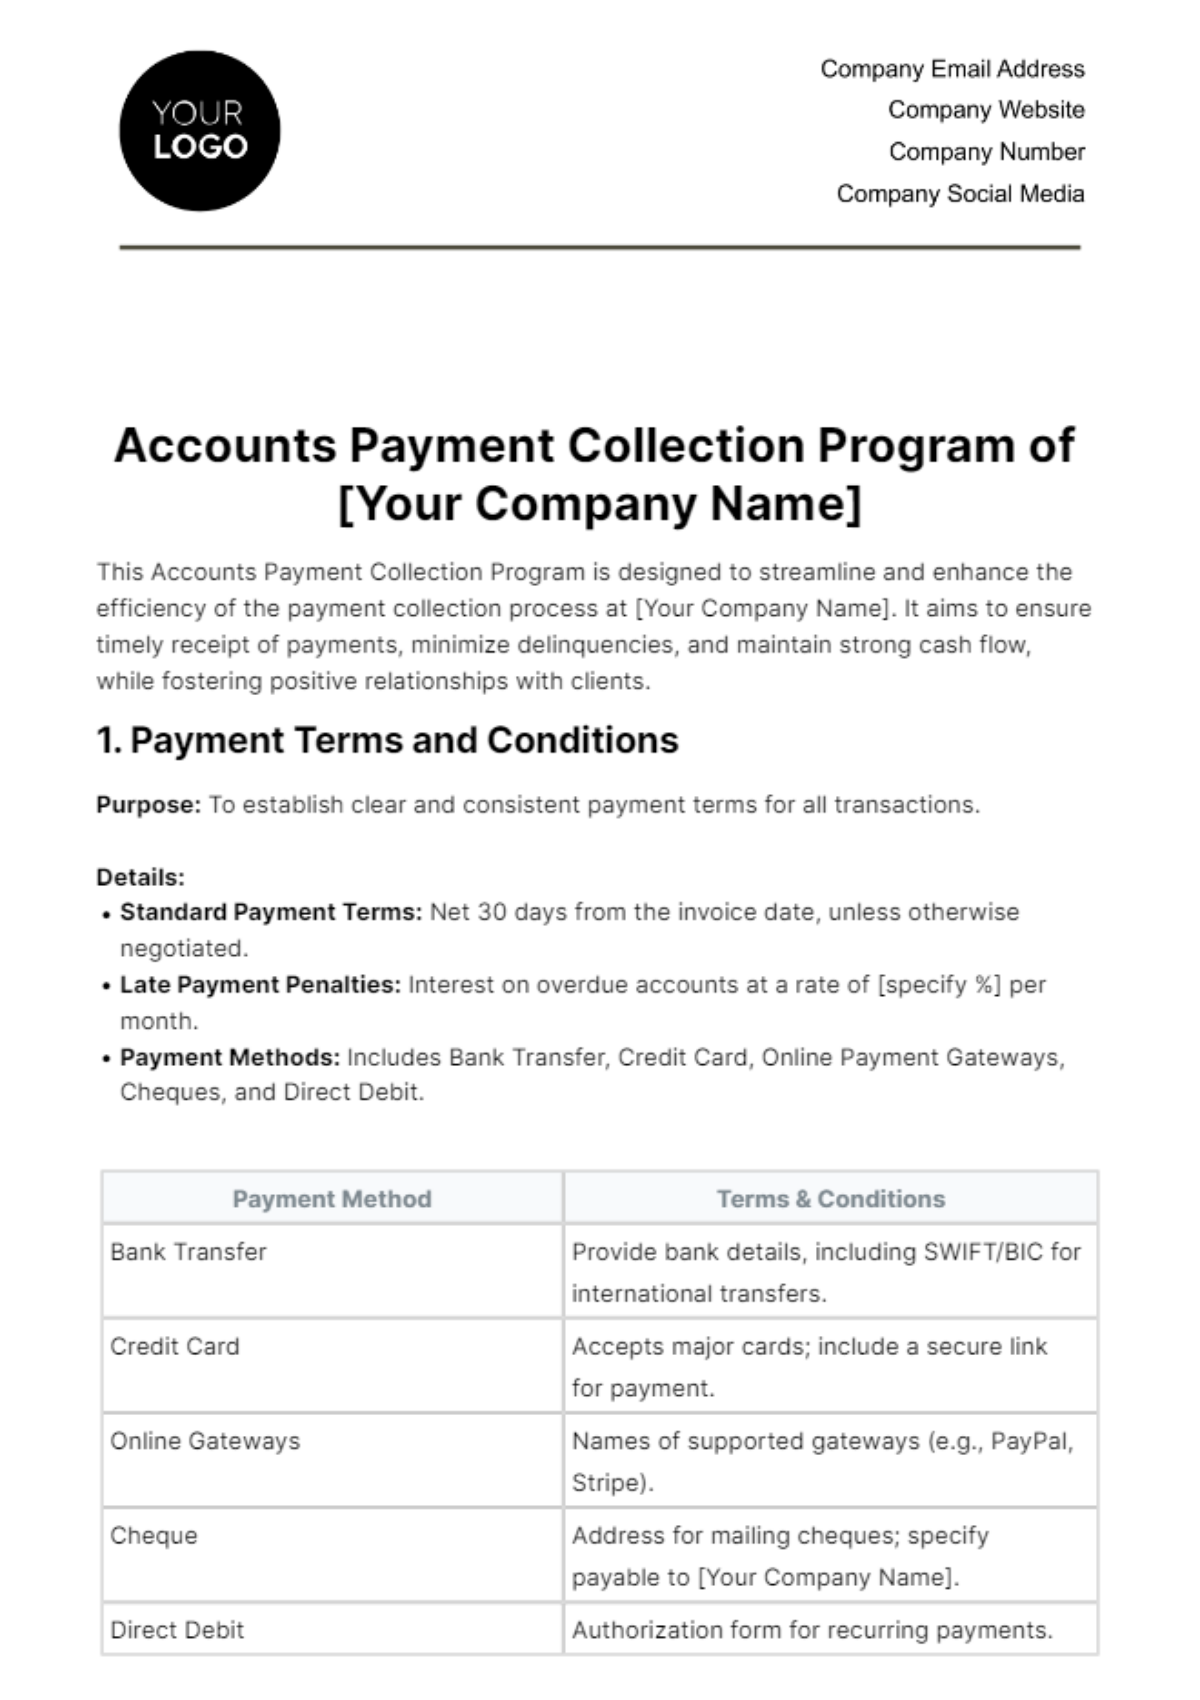 Free Accounts Payment Collection Program Template